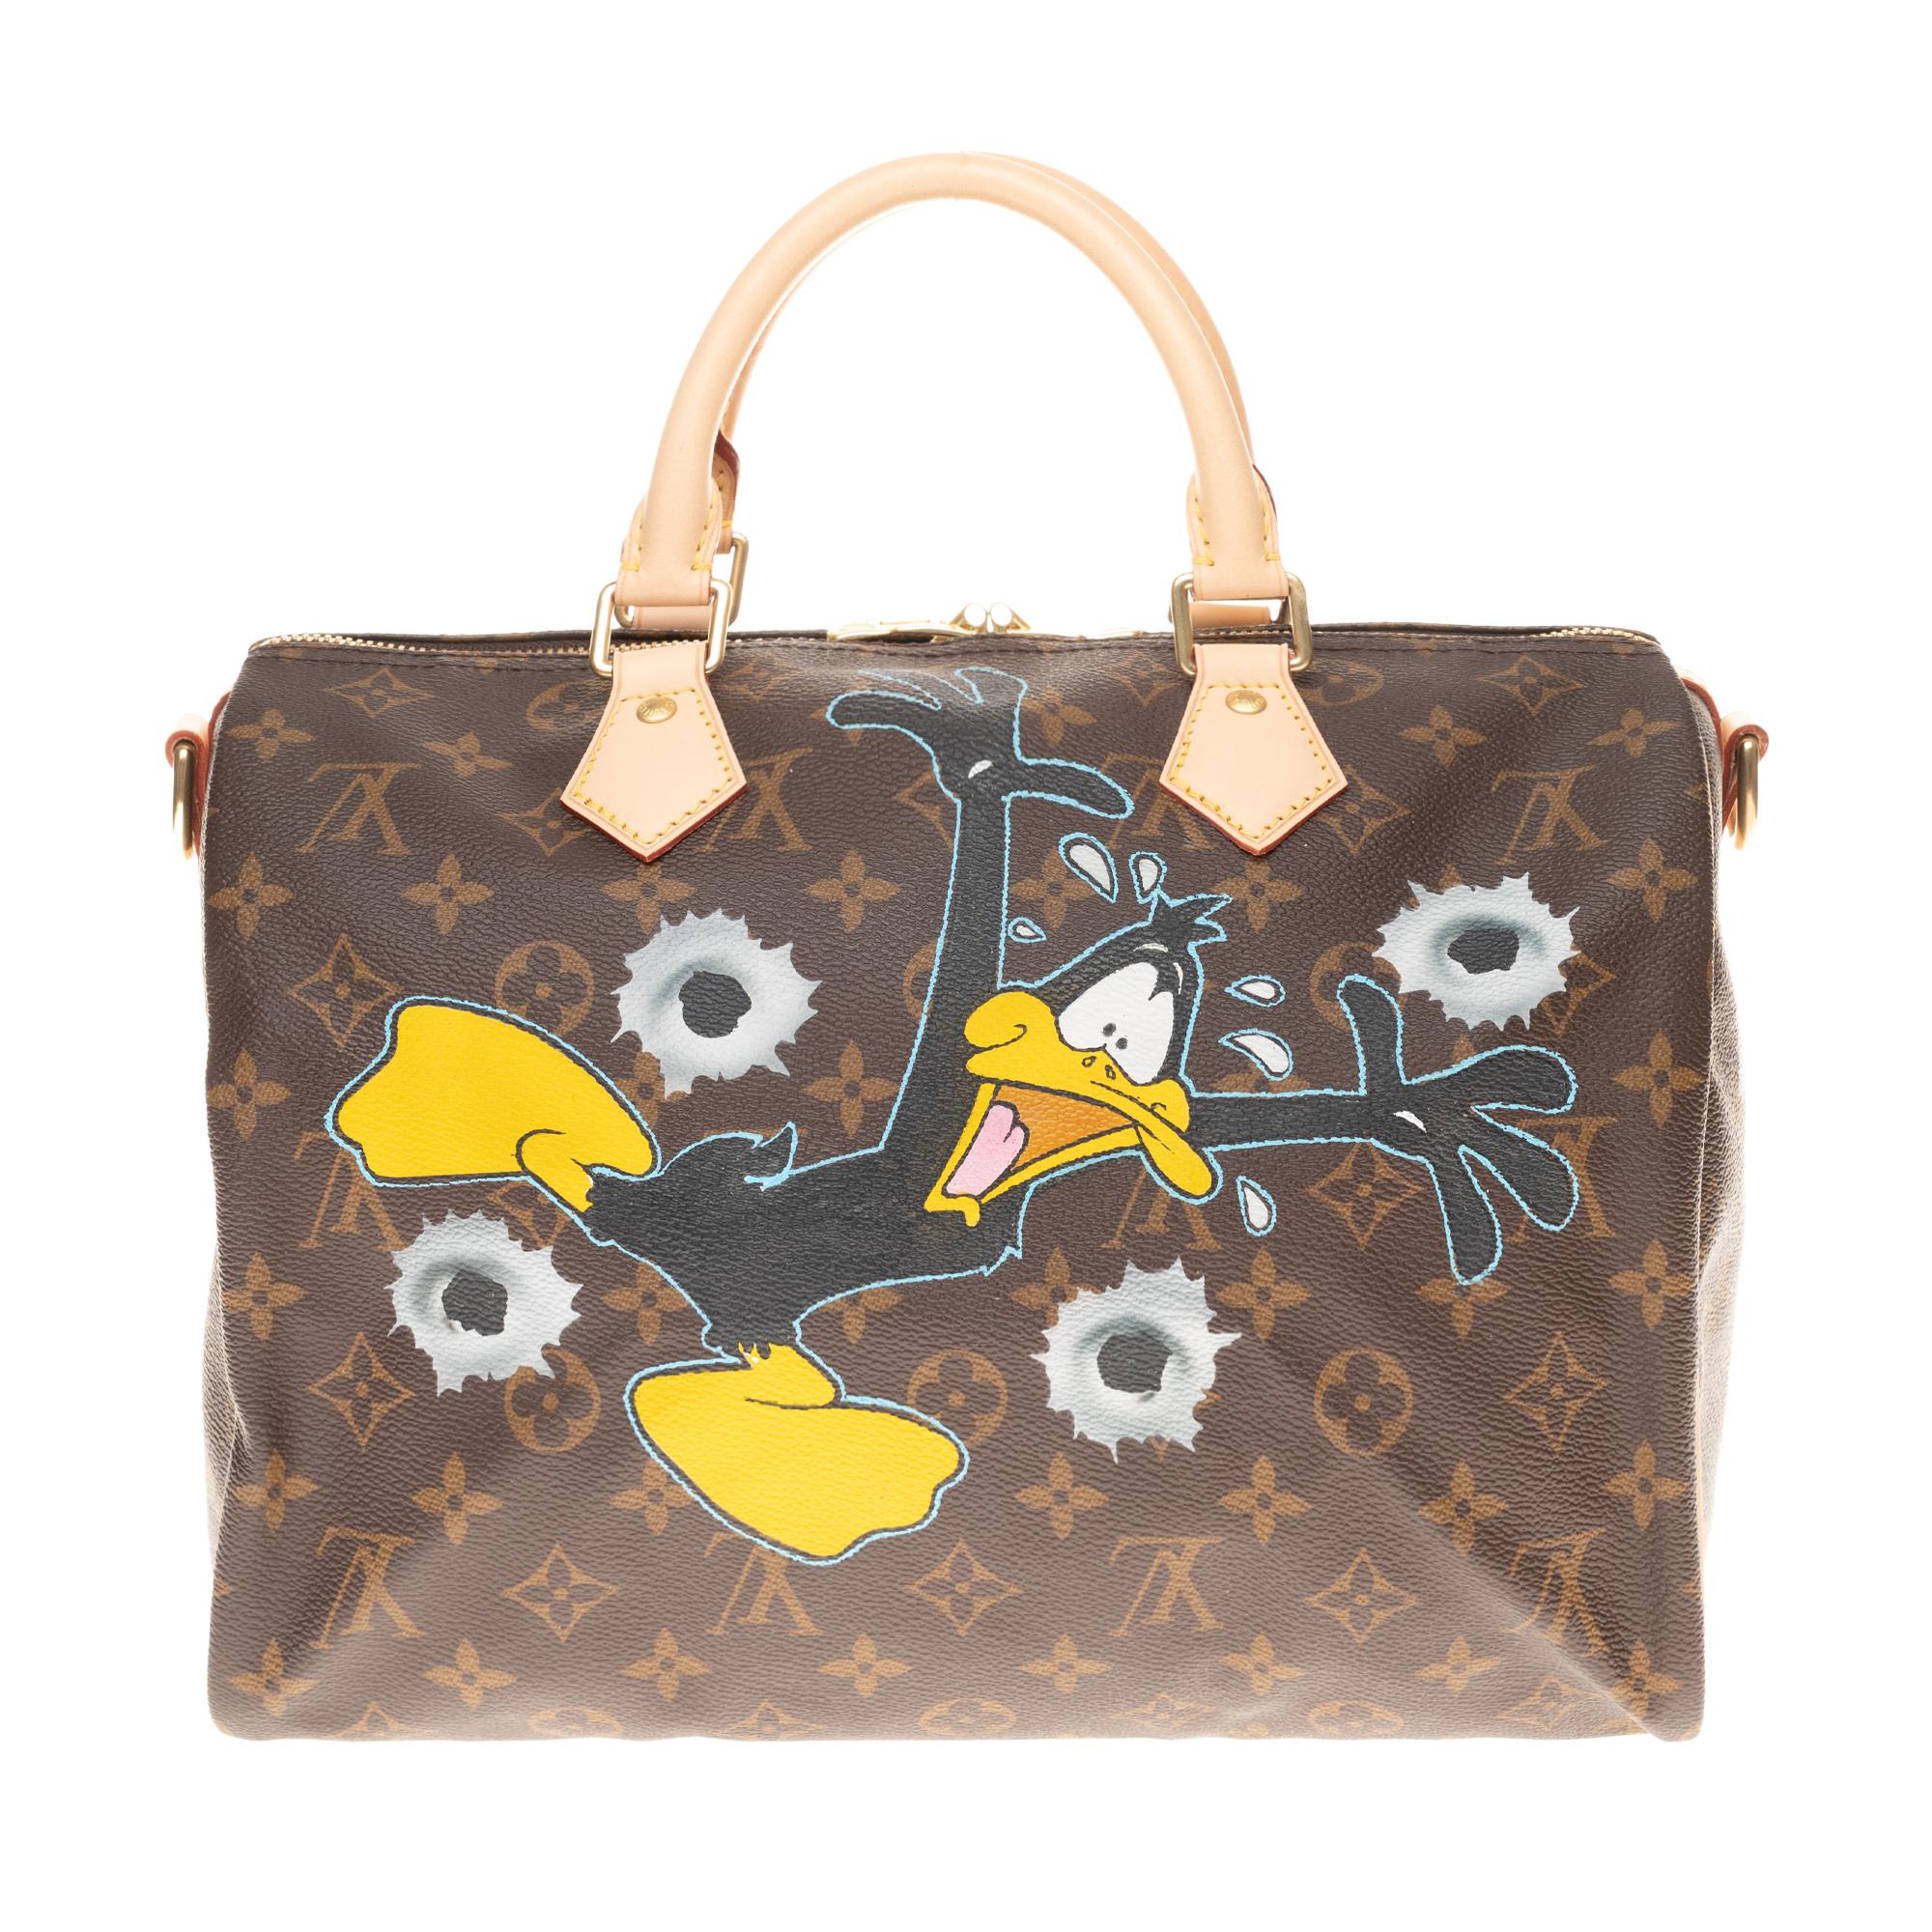 Beautiful brand new Louis Vuitton Speedy 30 cm with strap in monogram canvas coated brown and natural leather, gold metal trim, double handle in natural leather allowing a handheld or shoulder carry.
This article was personalized by the trendy